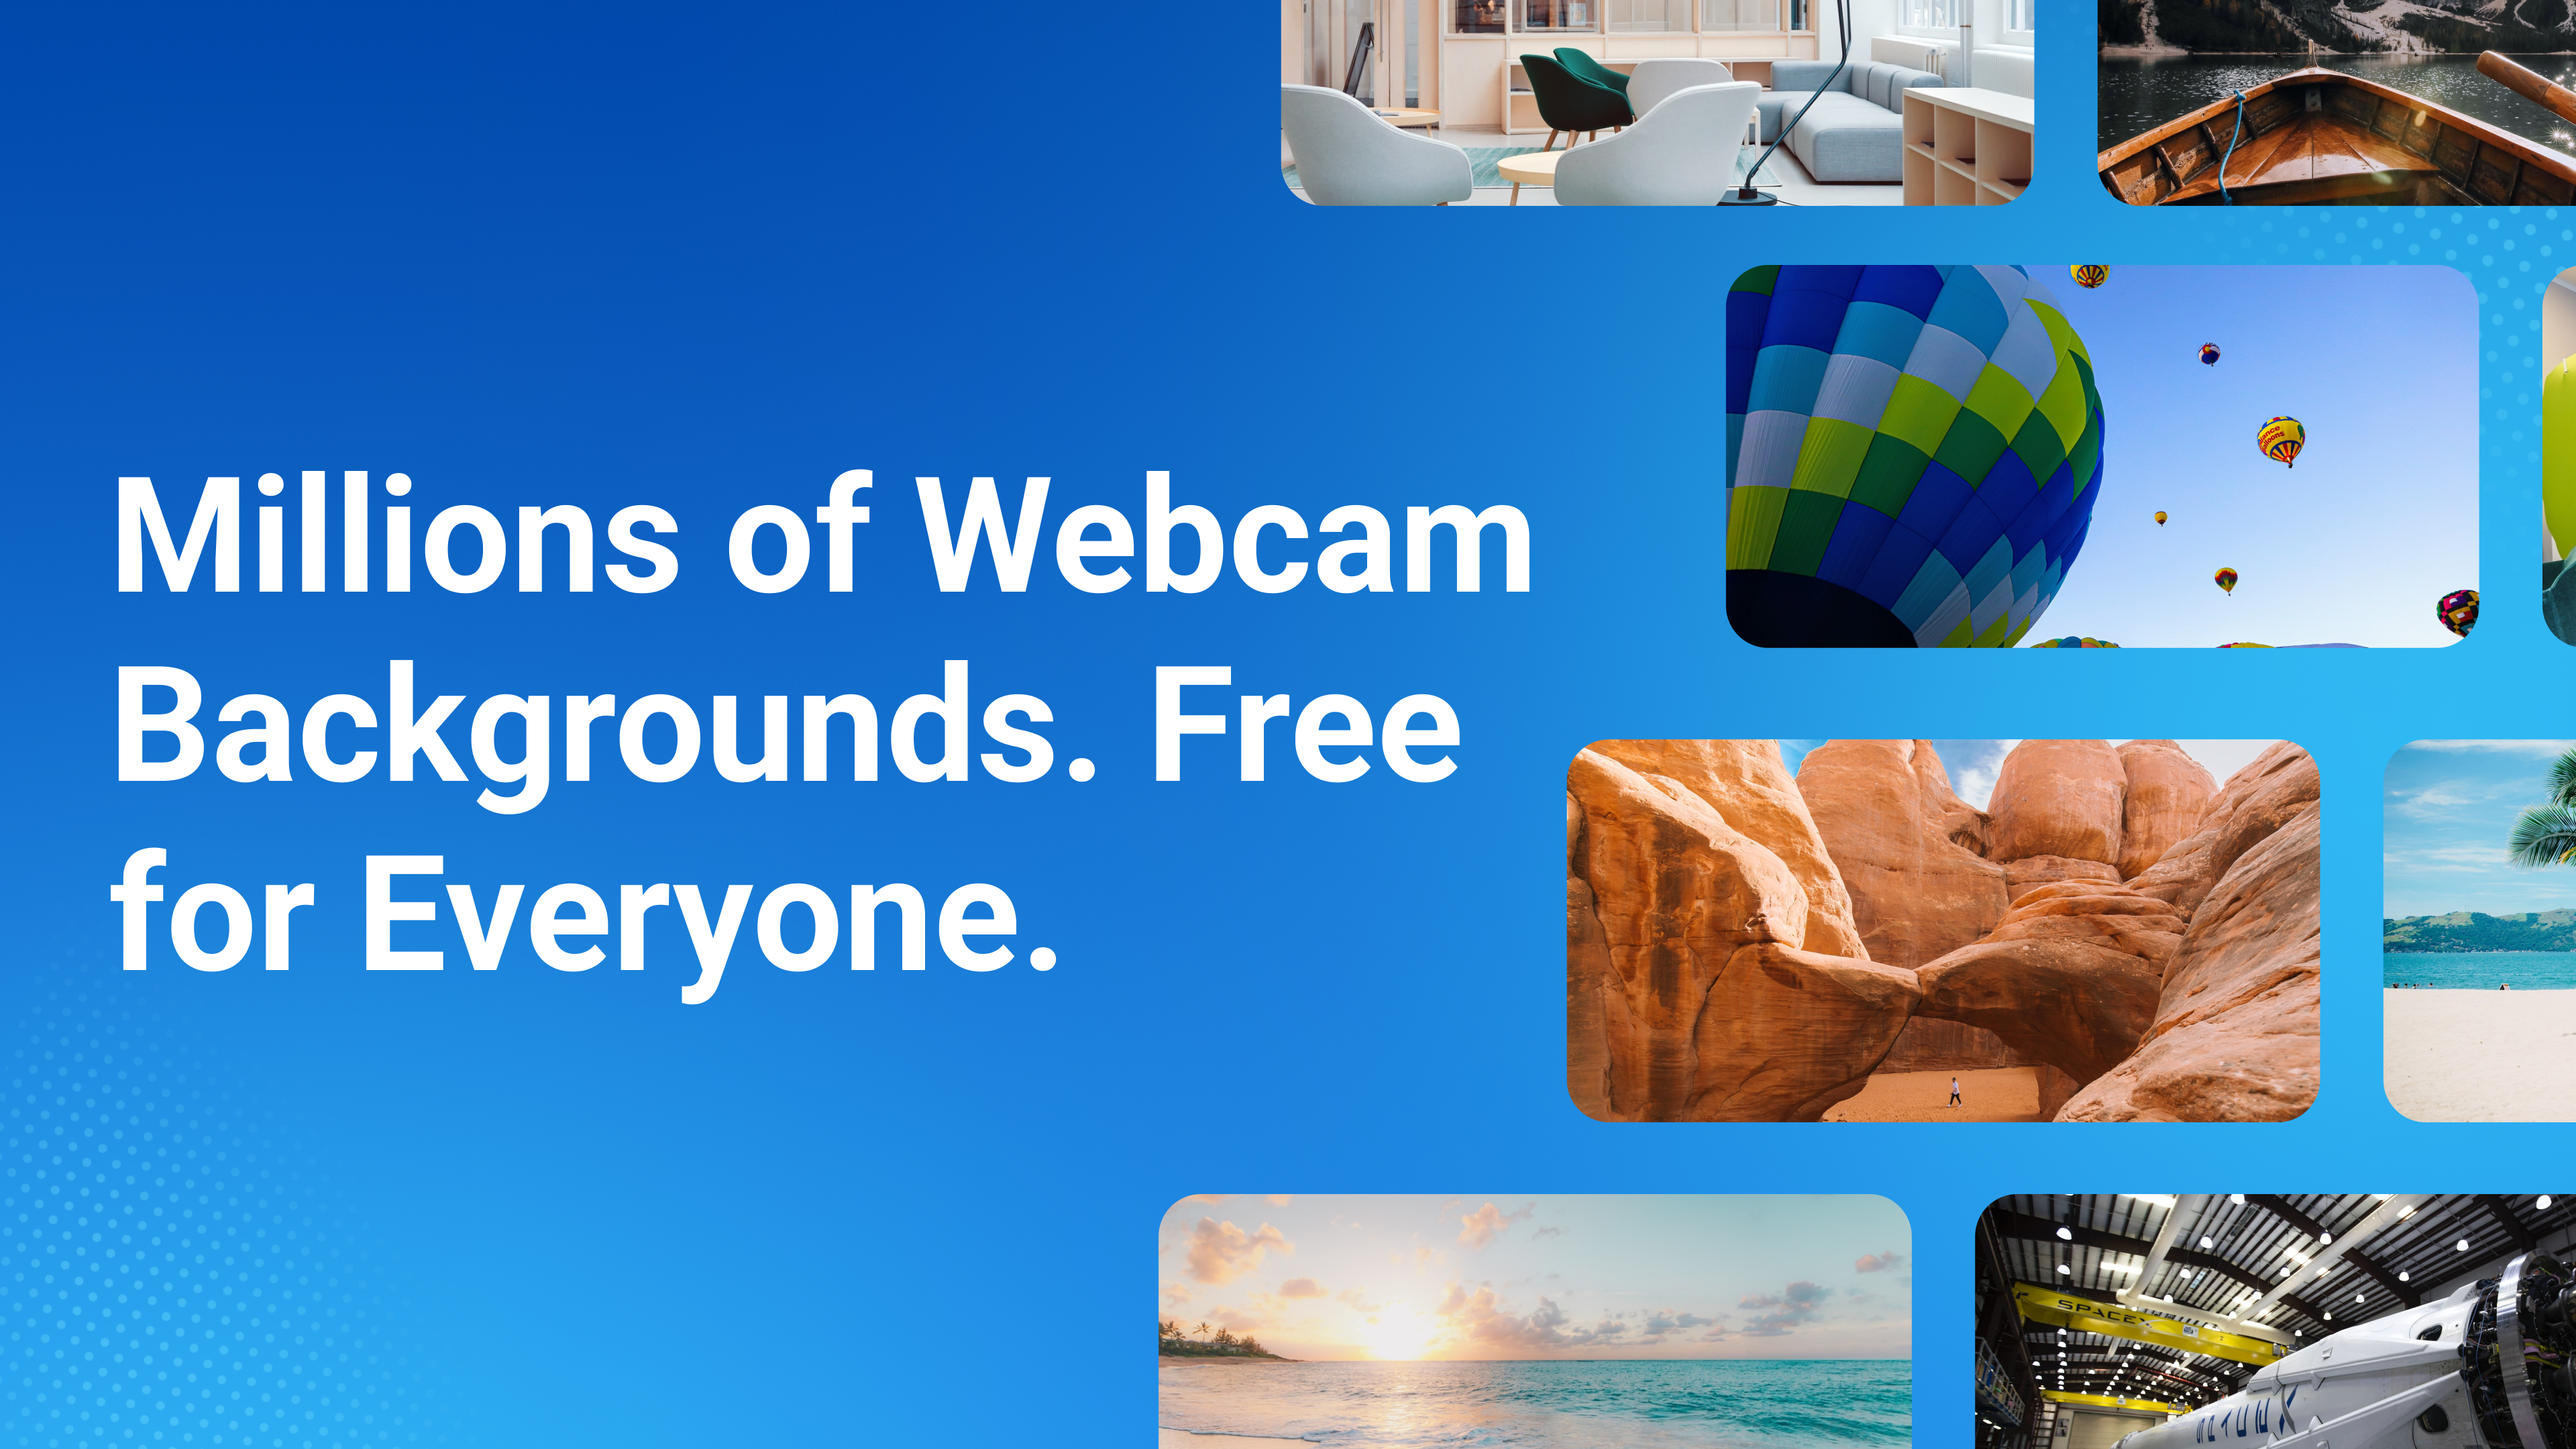 Millions of Webcam Backgrounds. Free for Everyone.